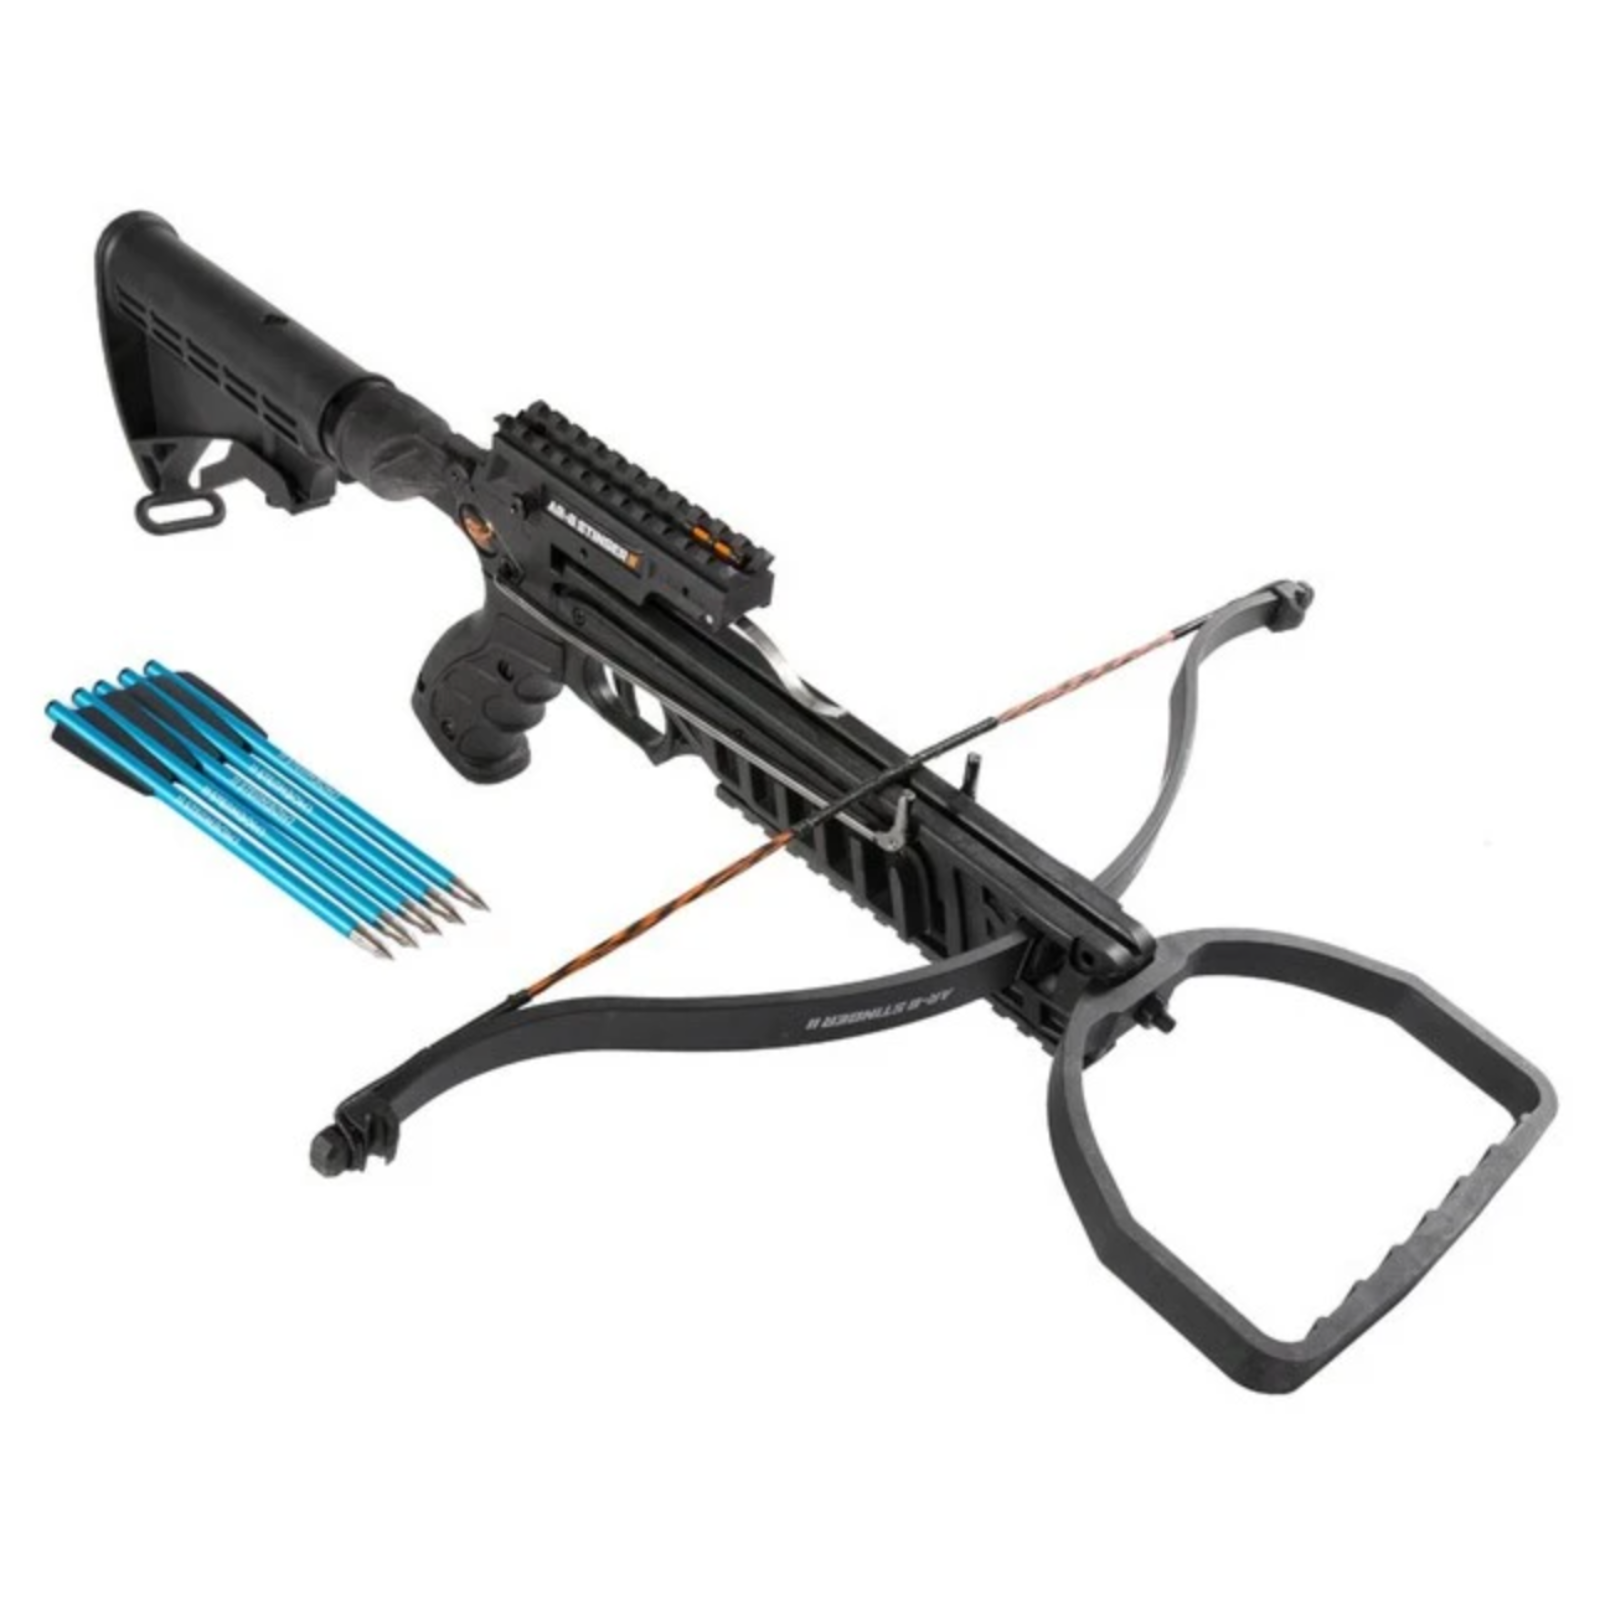 Steambow AR-6 Stinger 2 Survival Recurve Crossbow